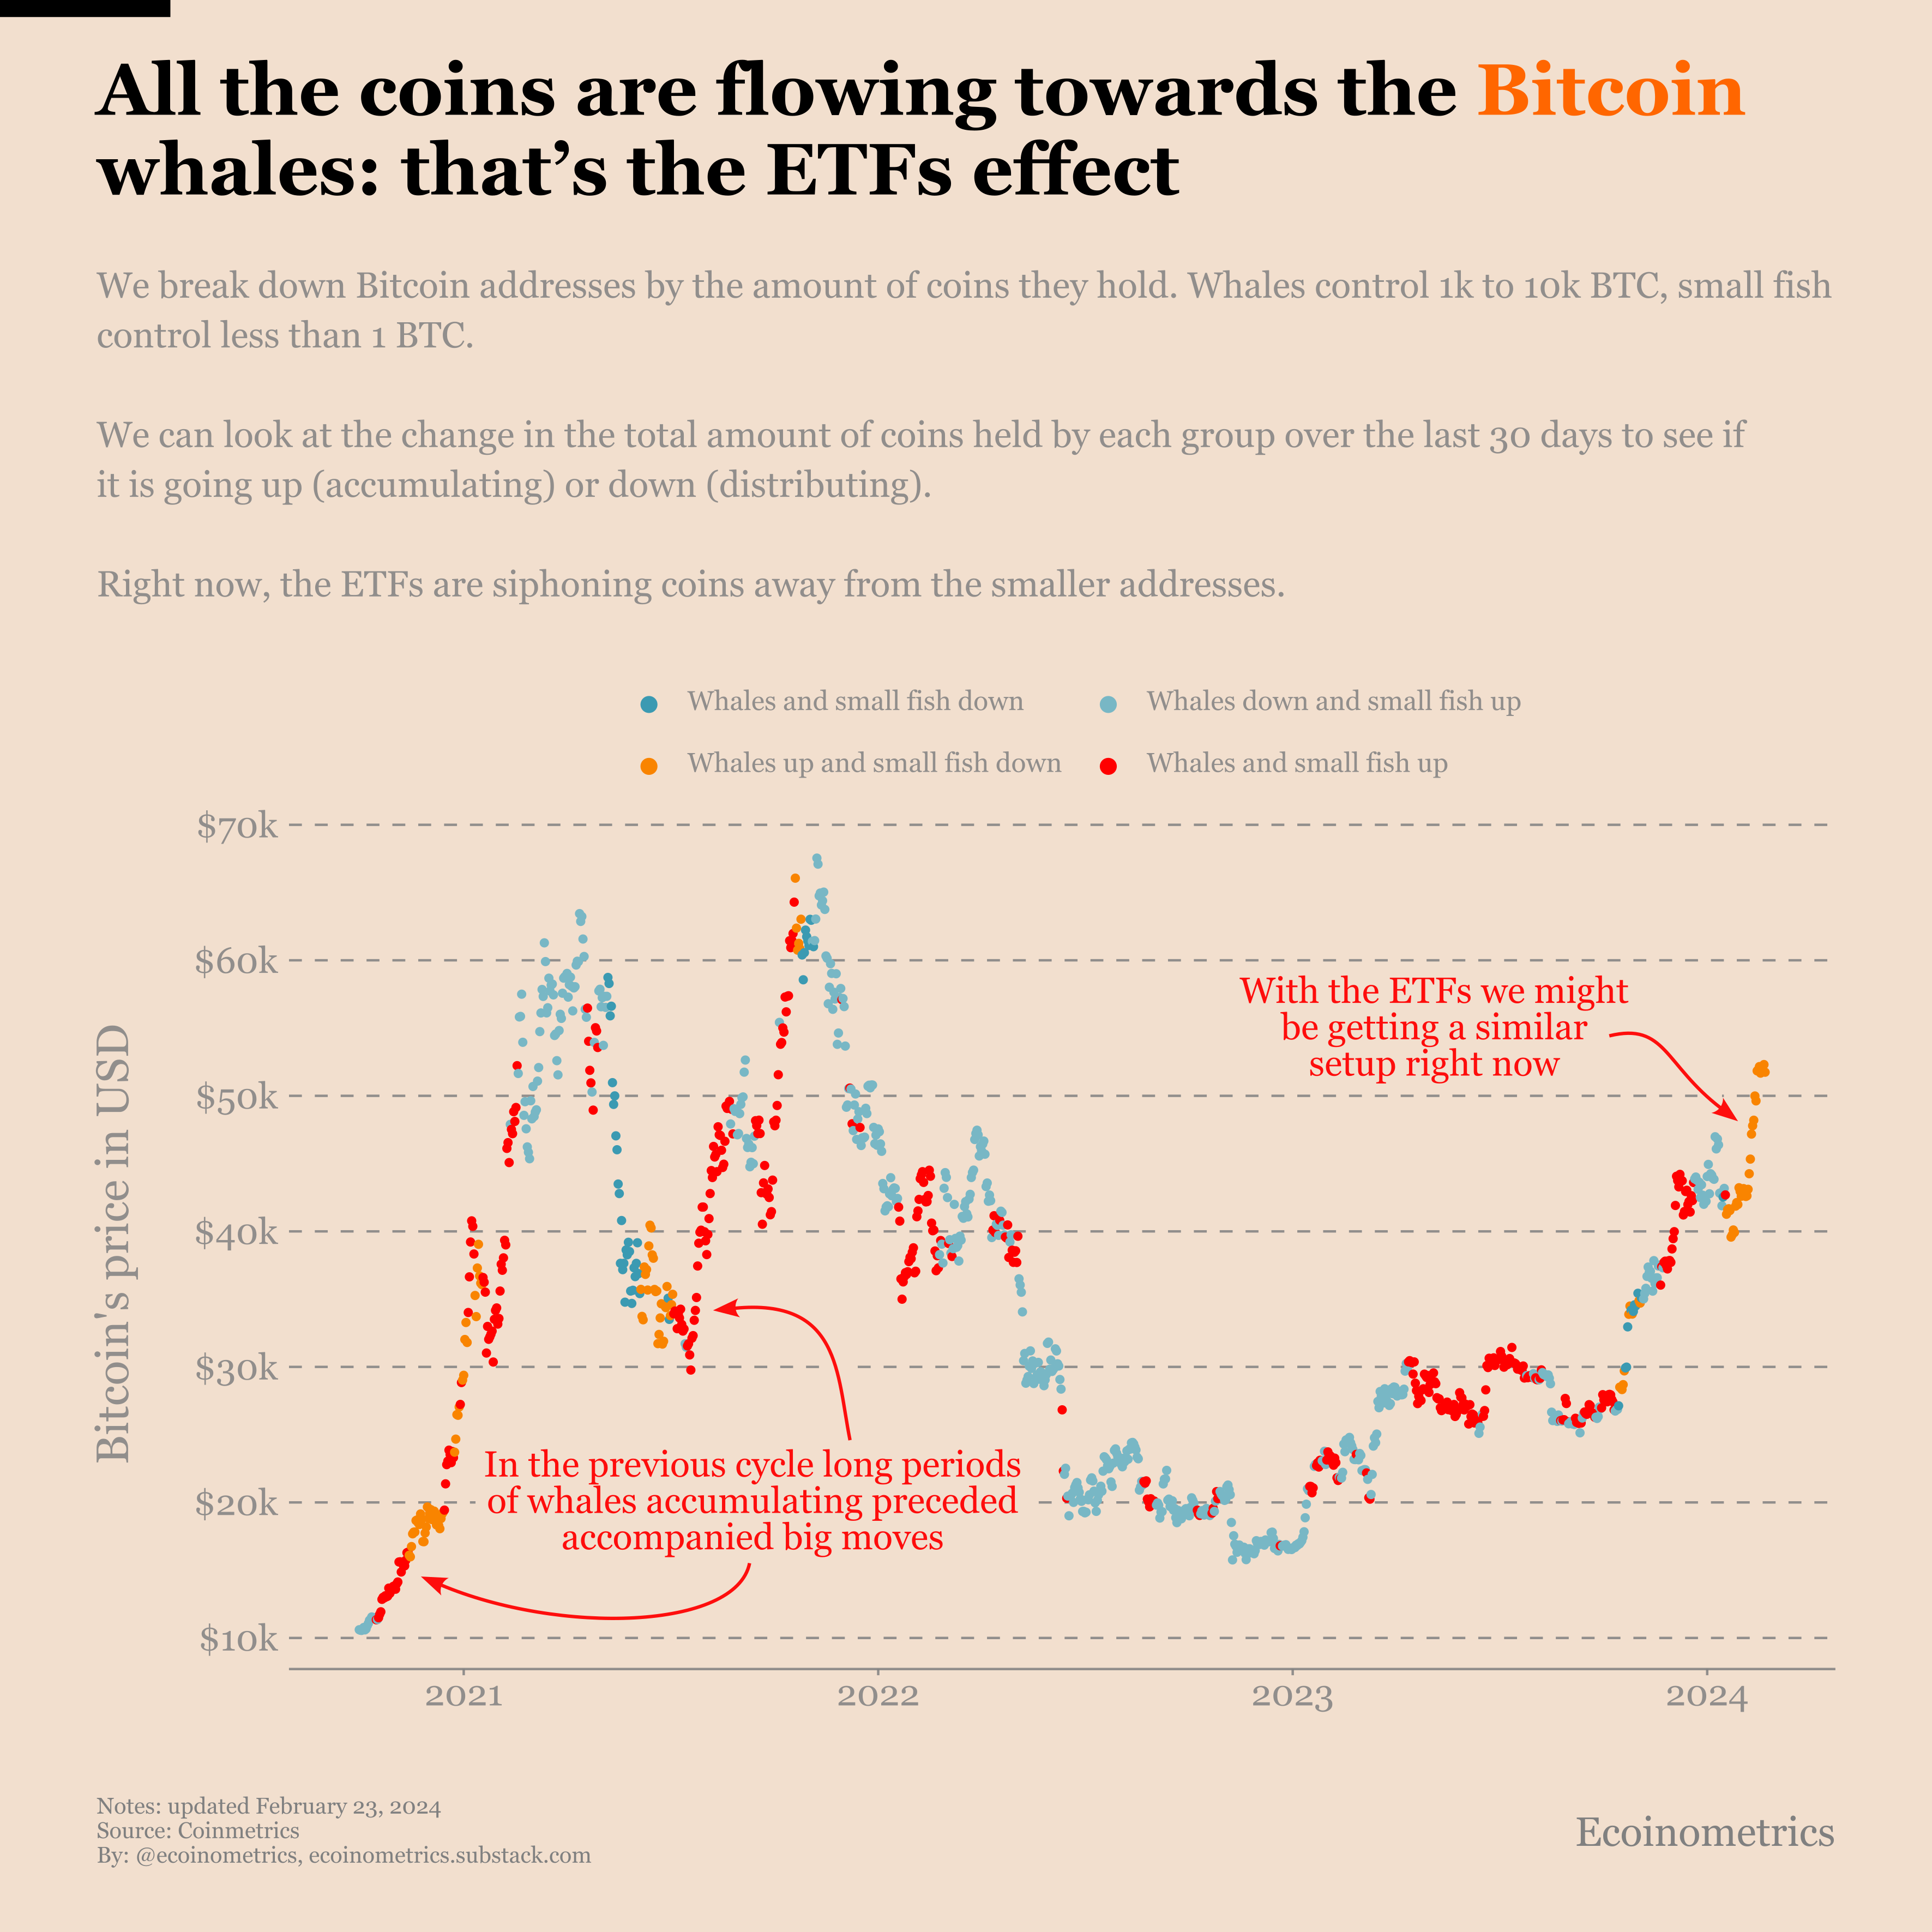 The ETF effect on Bitcoin